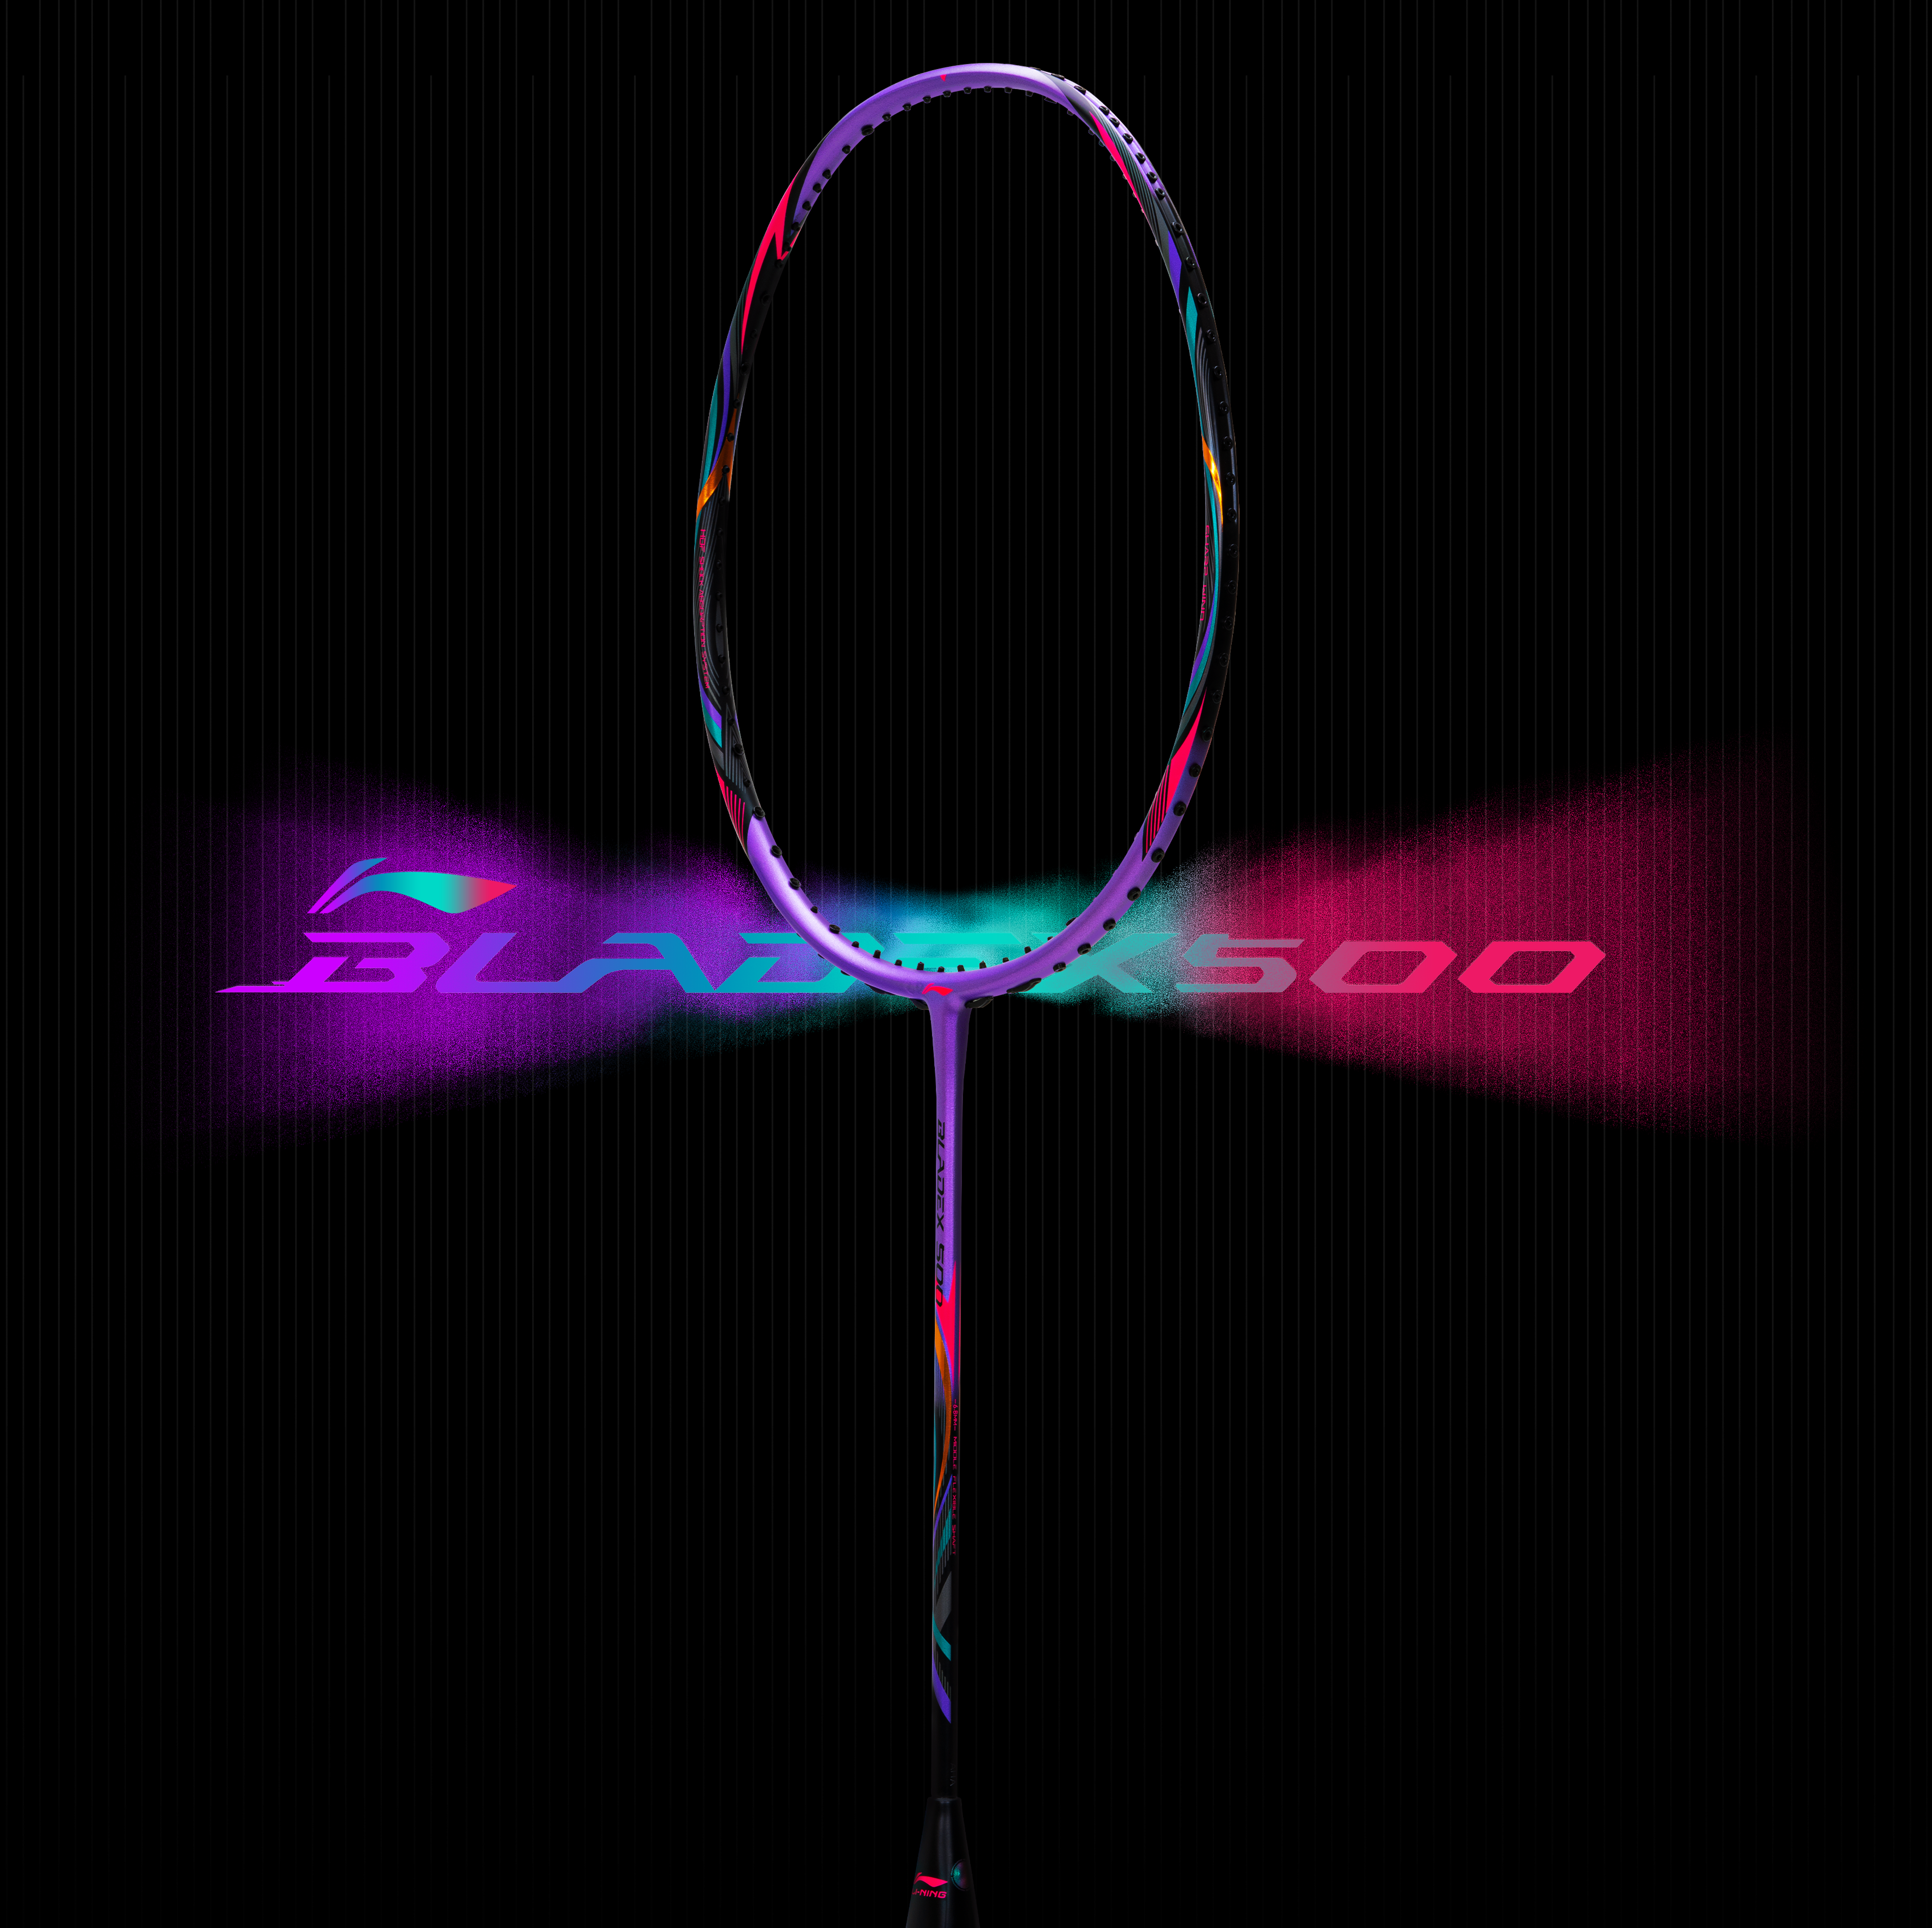 Blade X 500 - The pioneer's weapon.